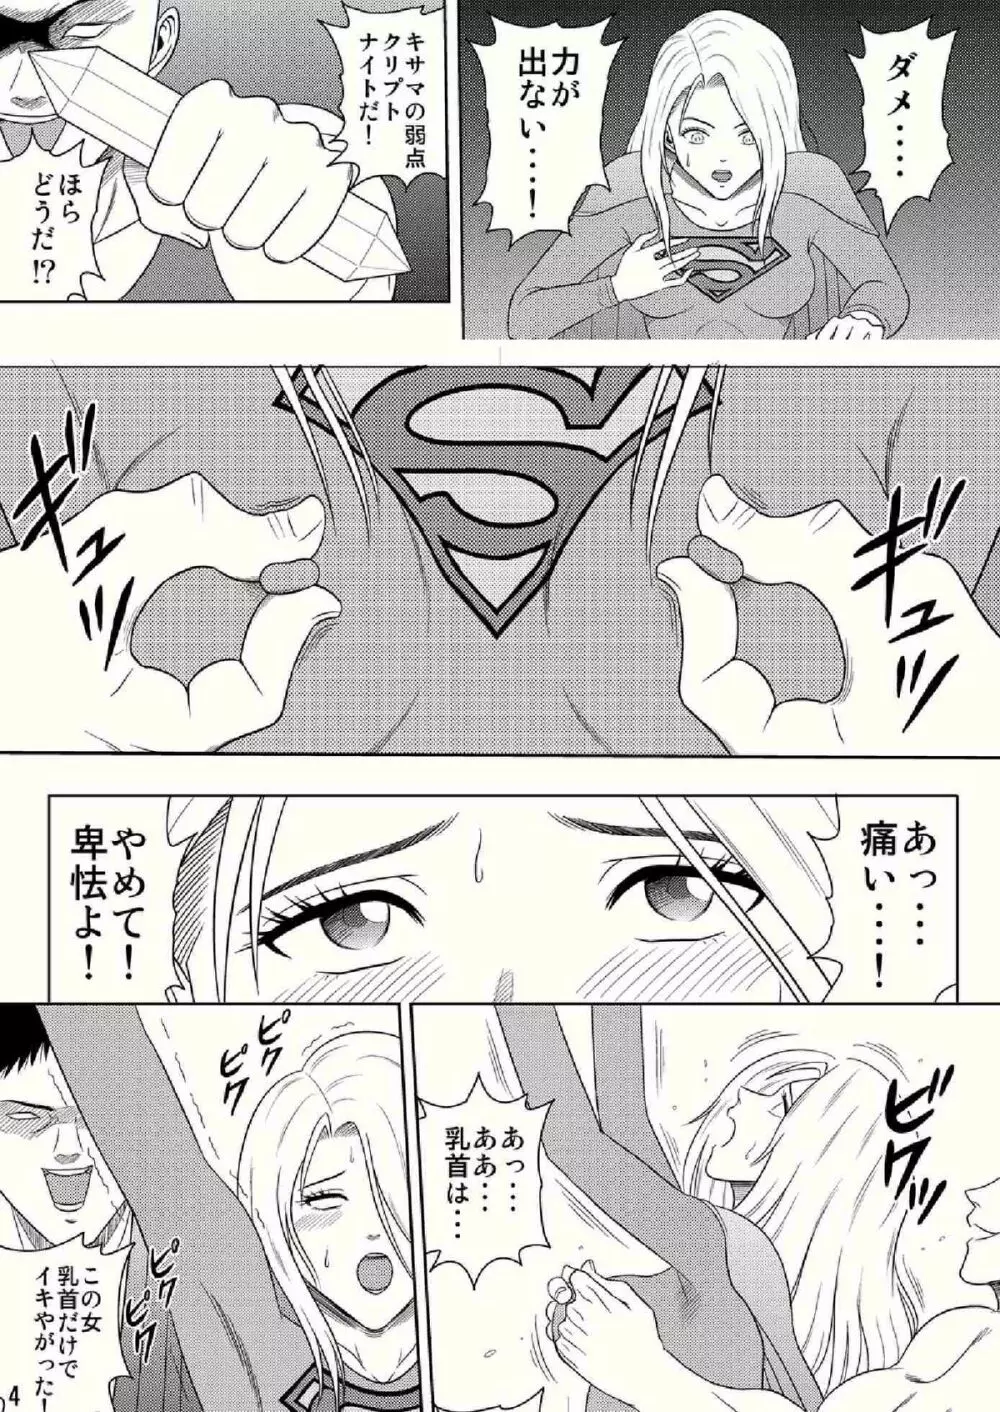 Toukikoubou vol.2 SUPER GIRL - Humiliation and Execution - Page.4